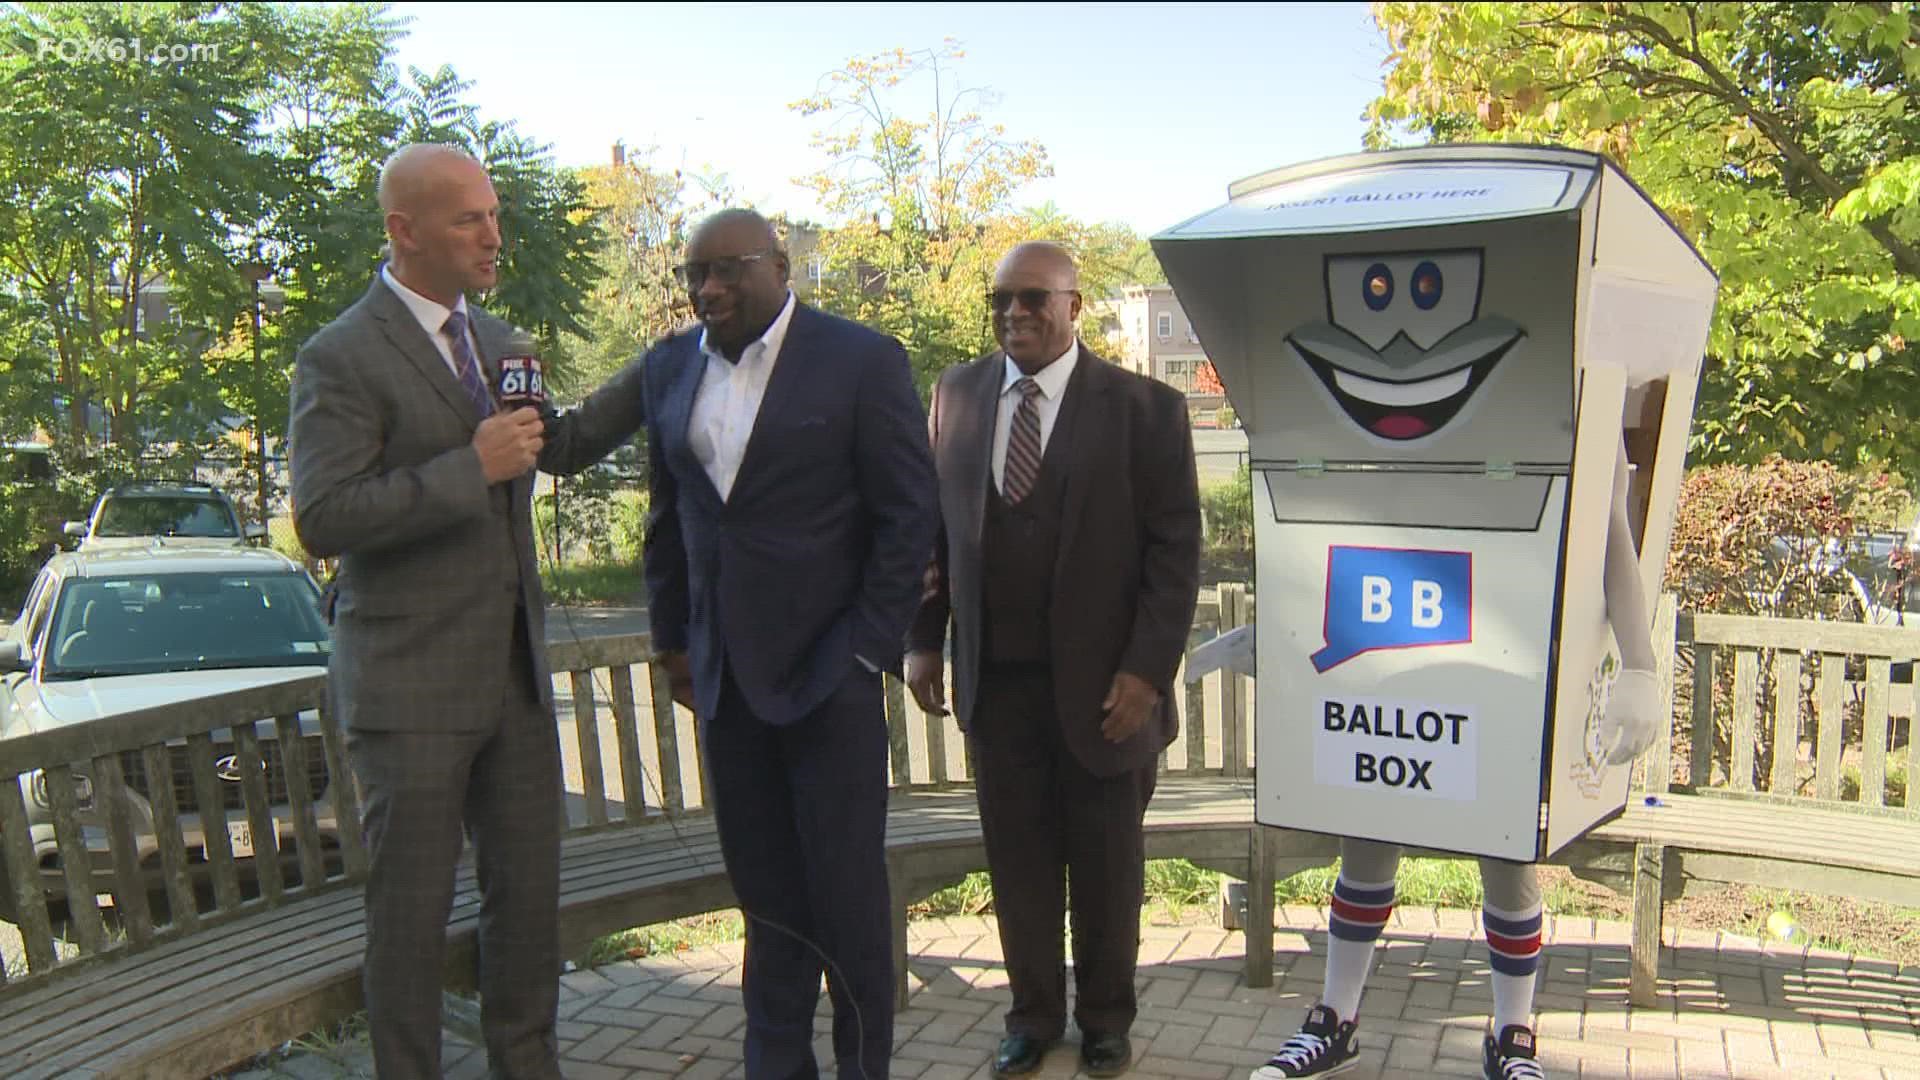 Tim is joined by BB The Ballot Box.